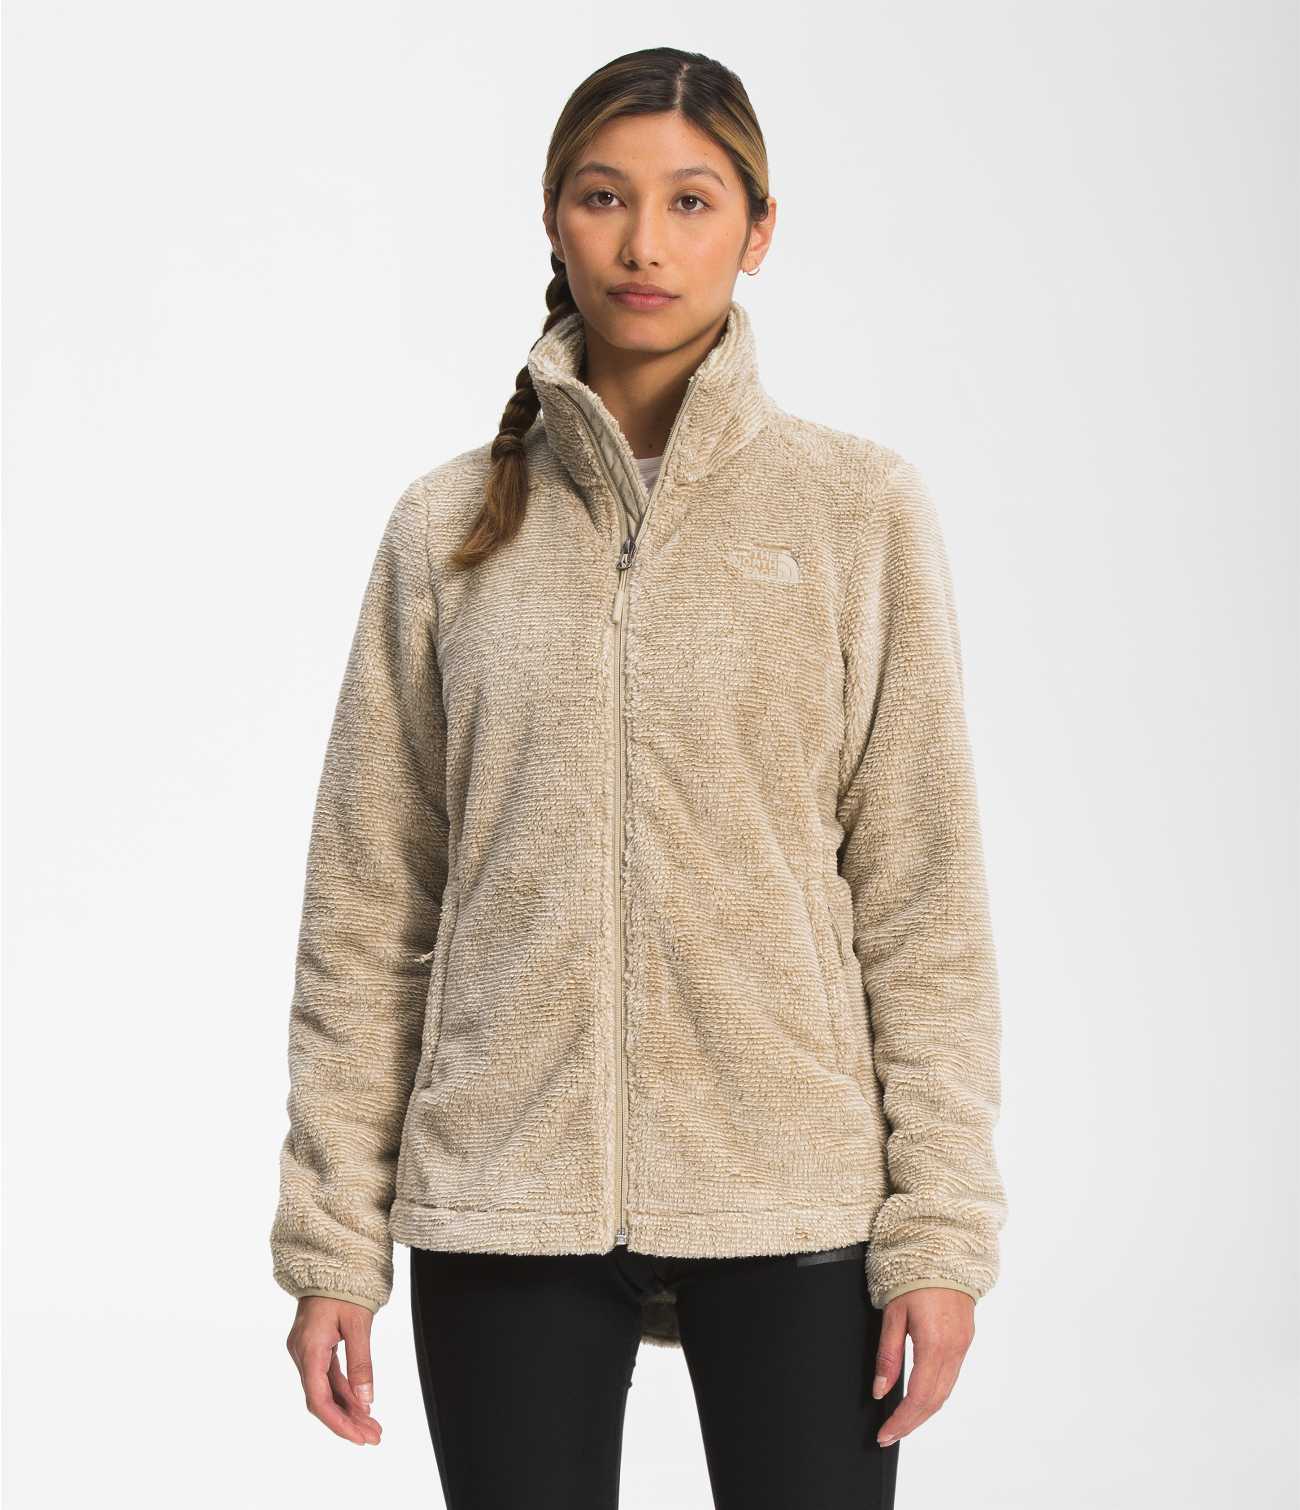 The North Face Osito Jacket Women's